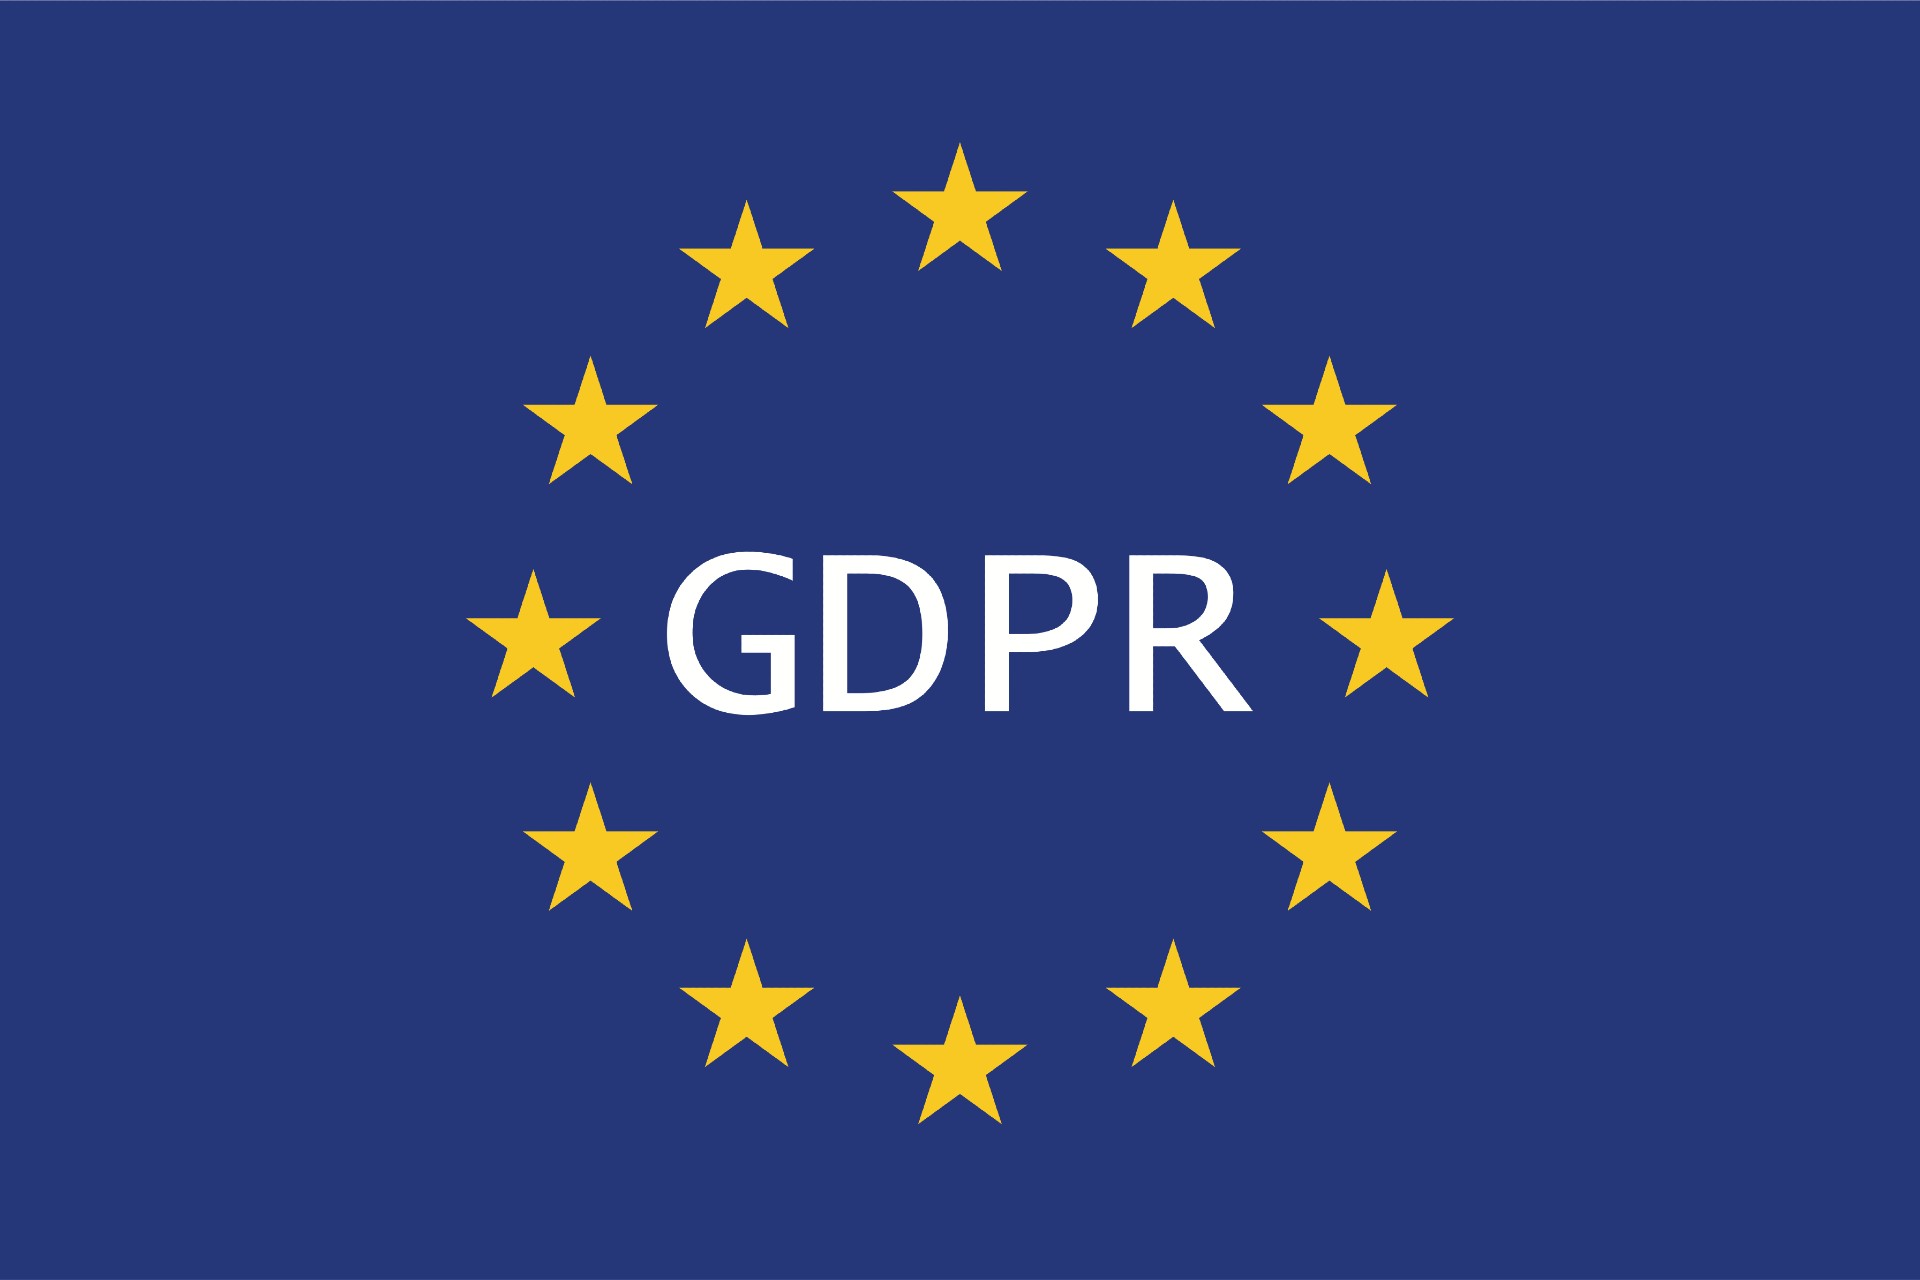 A four-year analysis of the General Data Protection Regulation (GDPR) adopted by the European Union reveals that following it was...stupid.